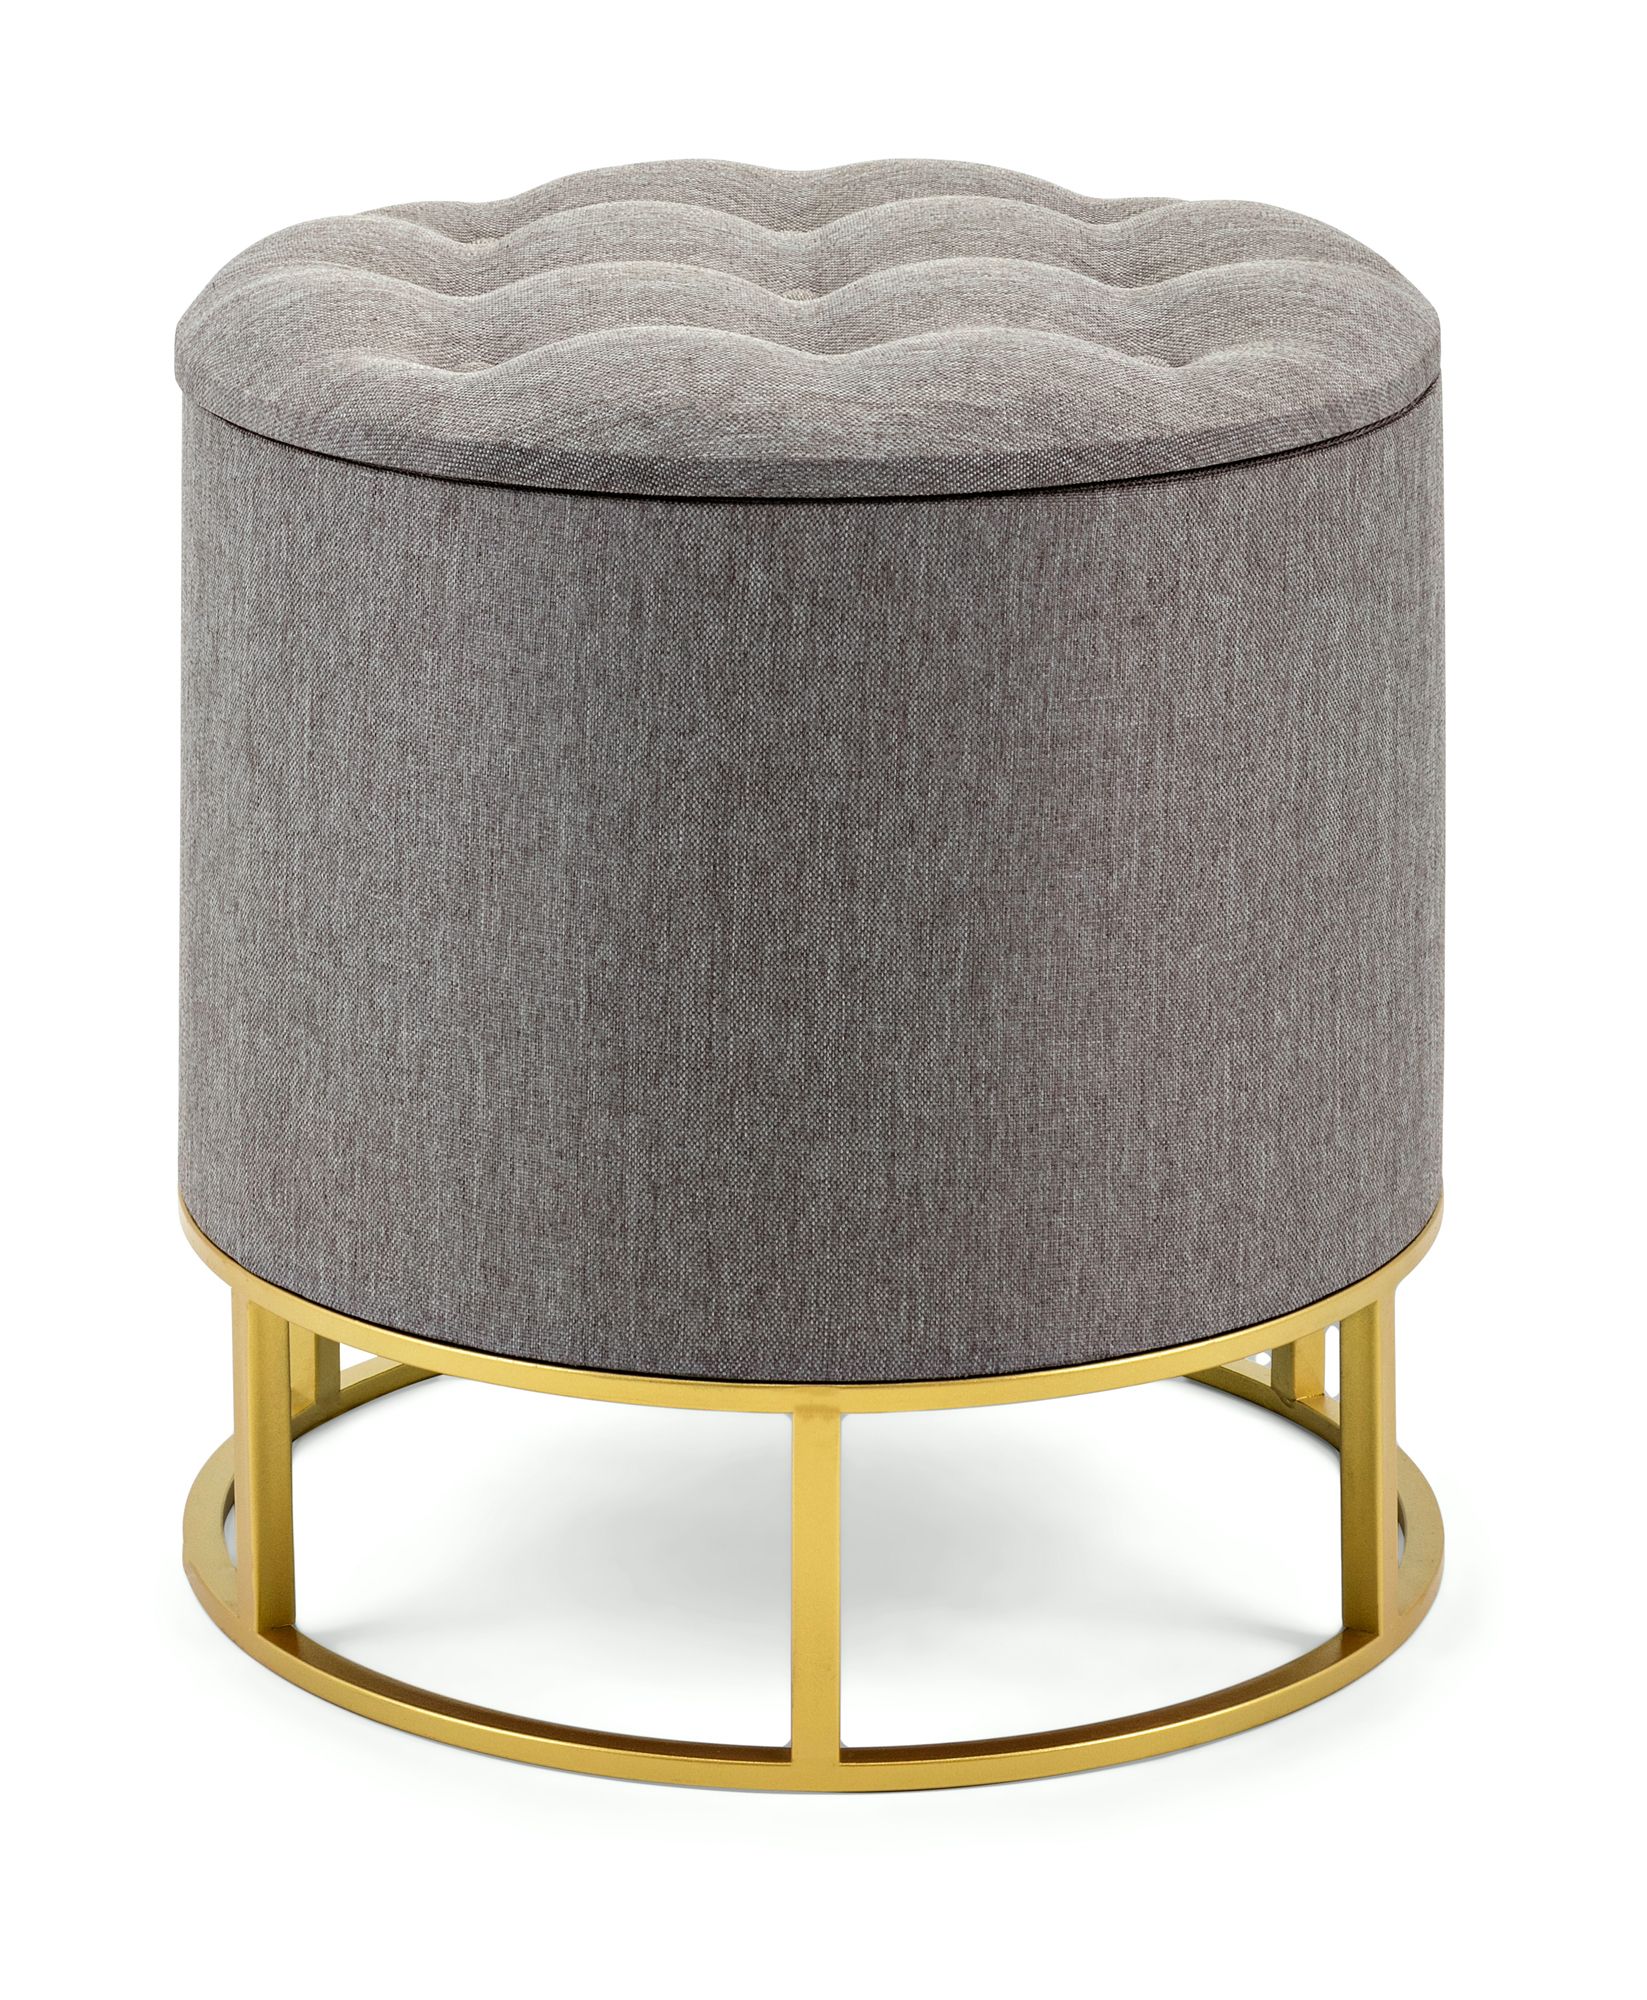 19" Gray Tufted Linen And Brass Finished Ottoman With Storage – Walmart Throughout Tufted Gray Velvet Ottomans (View 12 of 20)